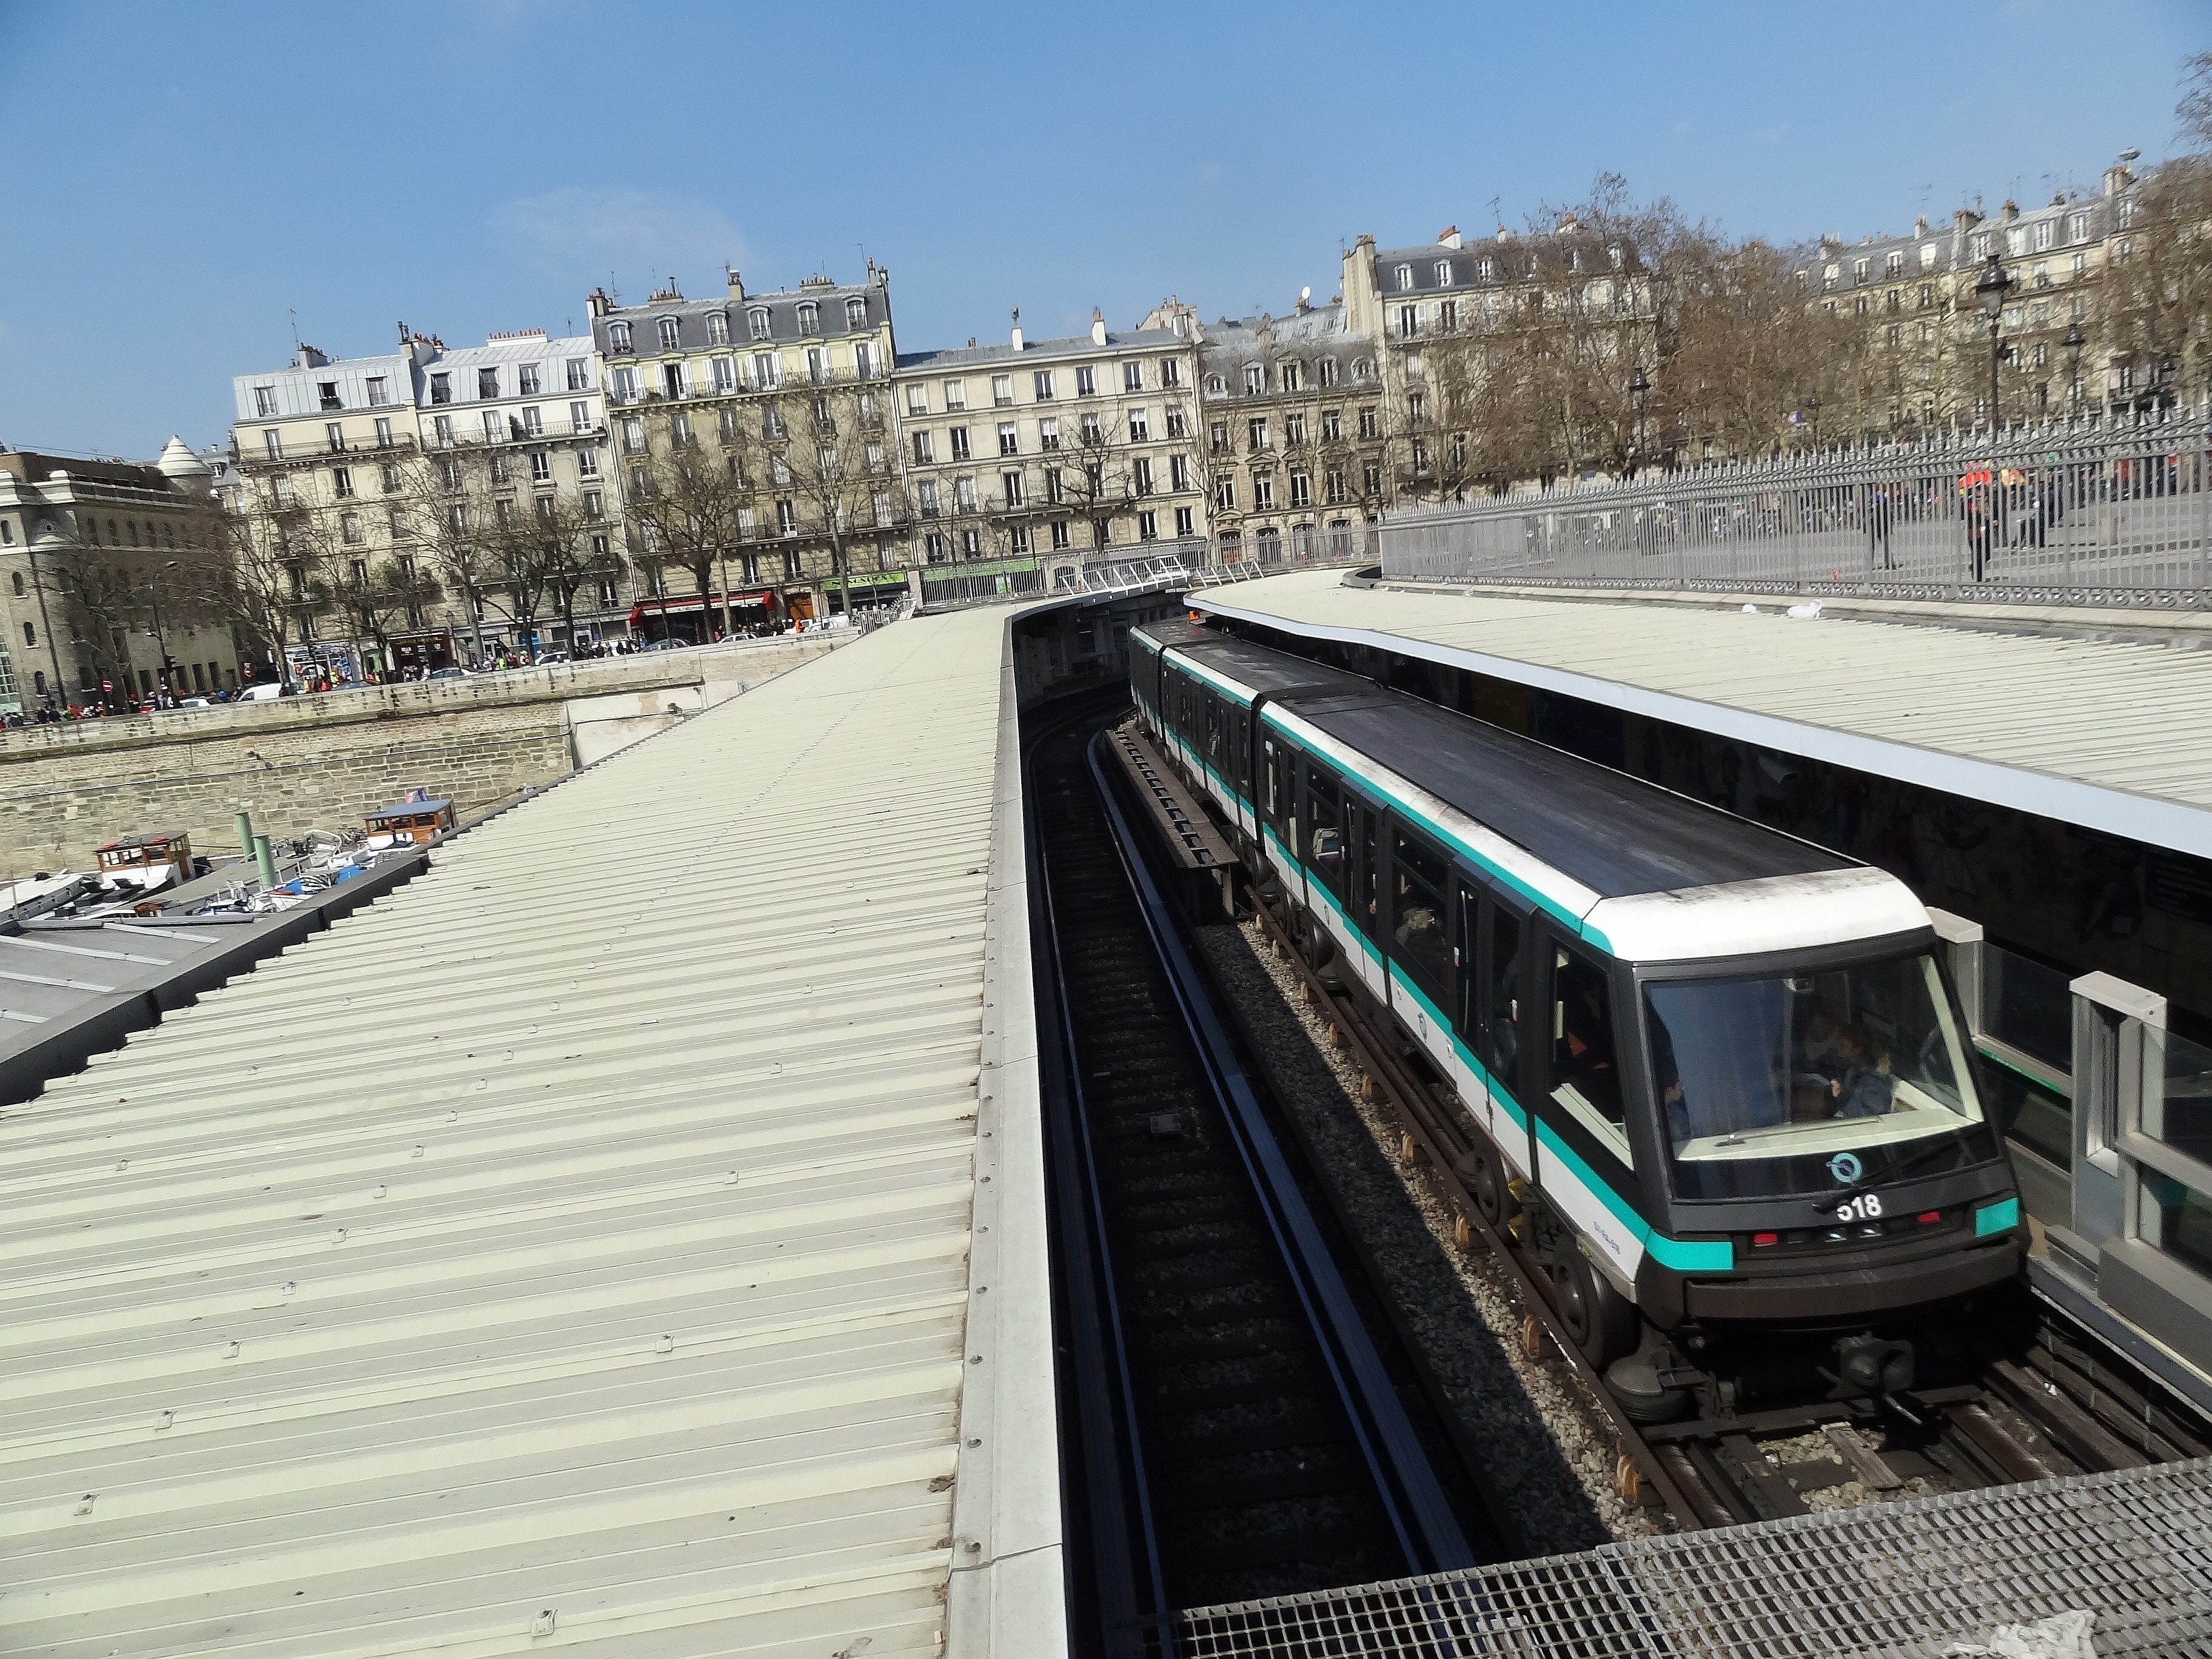 FUNET Railway Photography Archive: France - metro trains